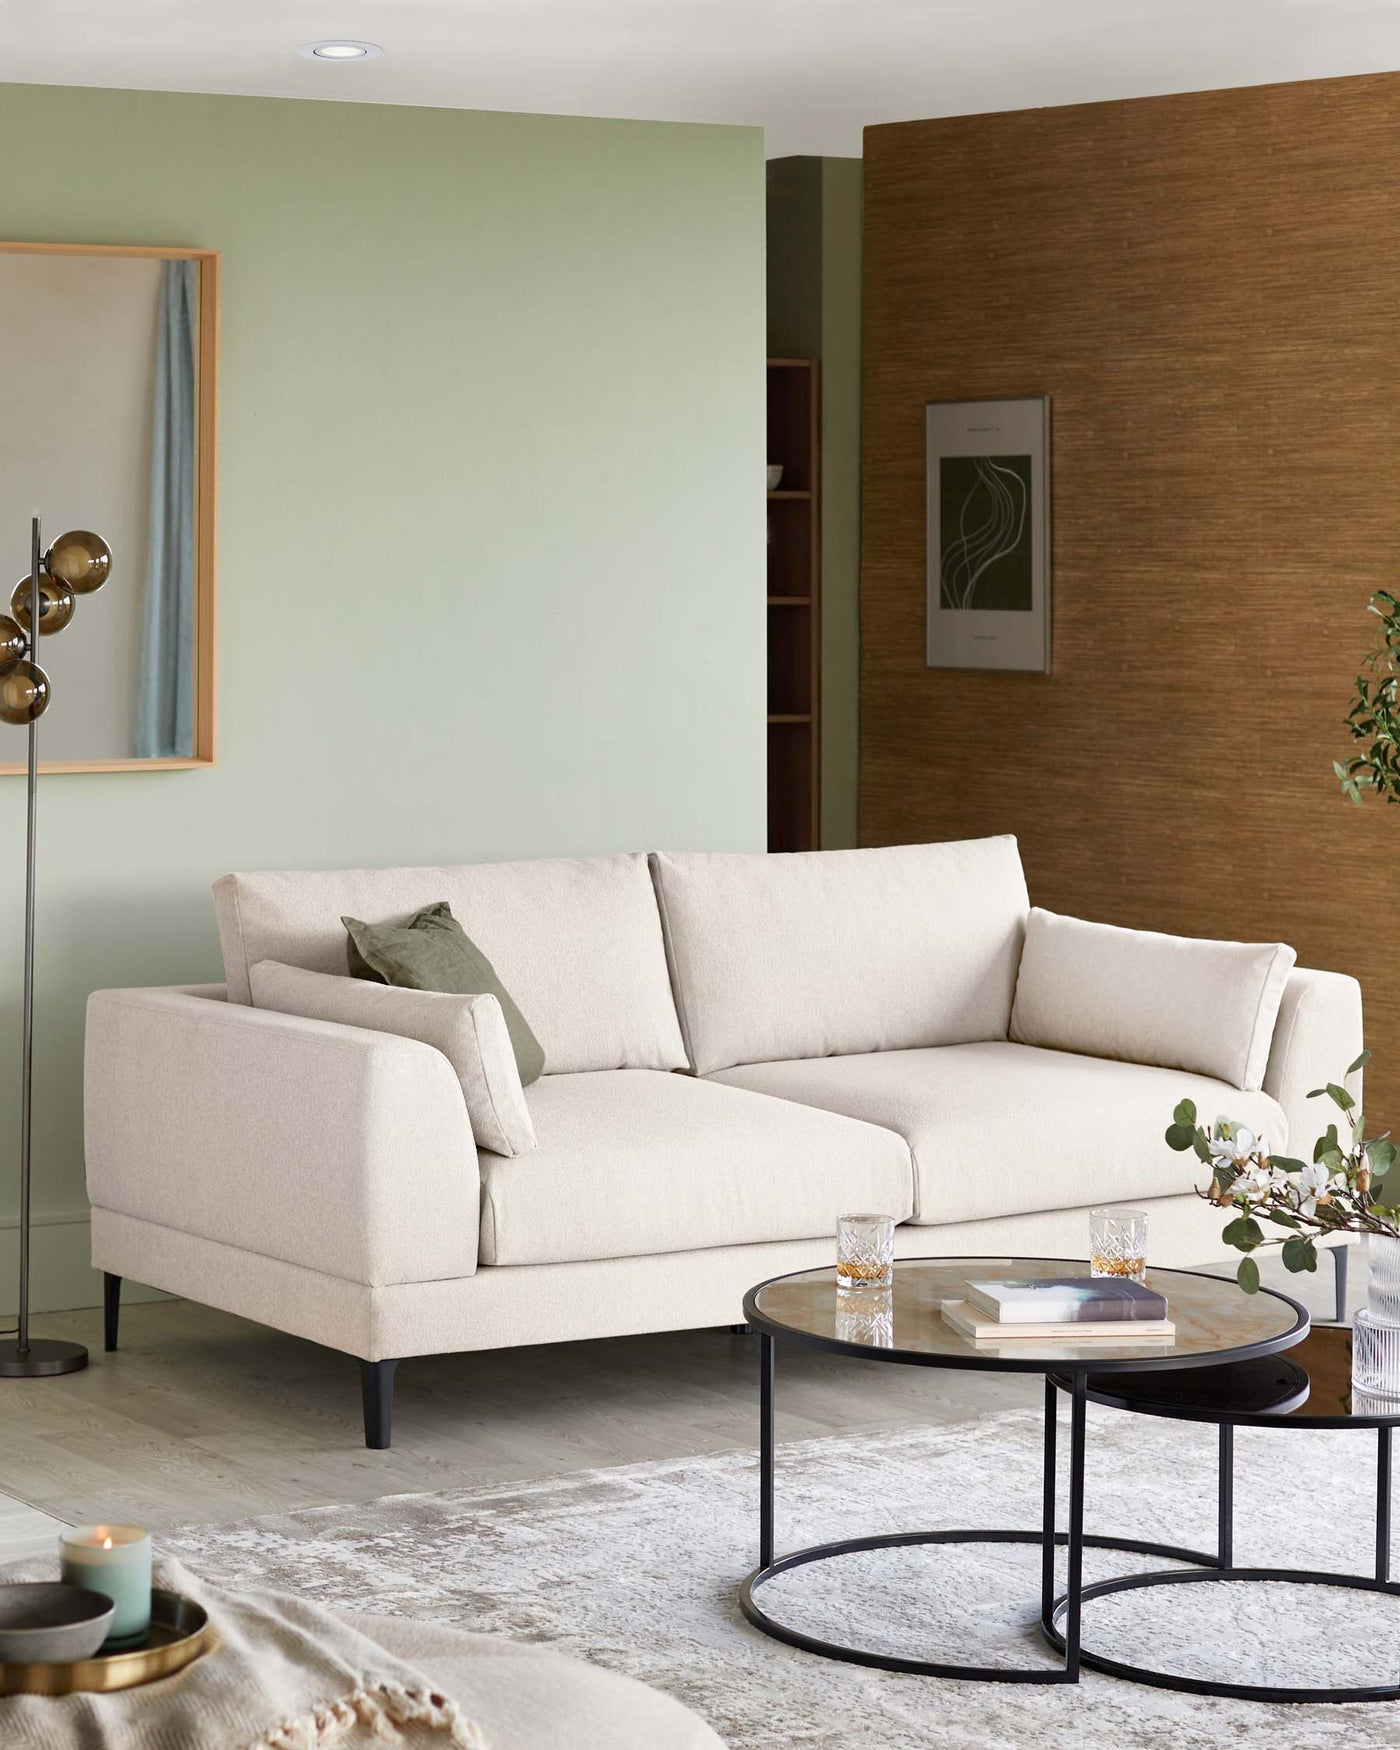 Elegant light beige corner sectional sofa with a minimalist design on low-profile black legs. Accompanied by a two-tiered round coffee table with a black metal frame and glass tops.